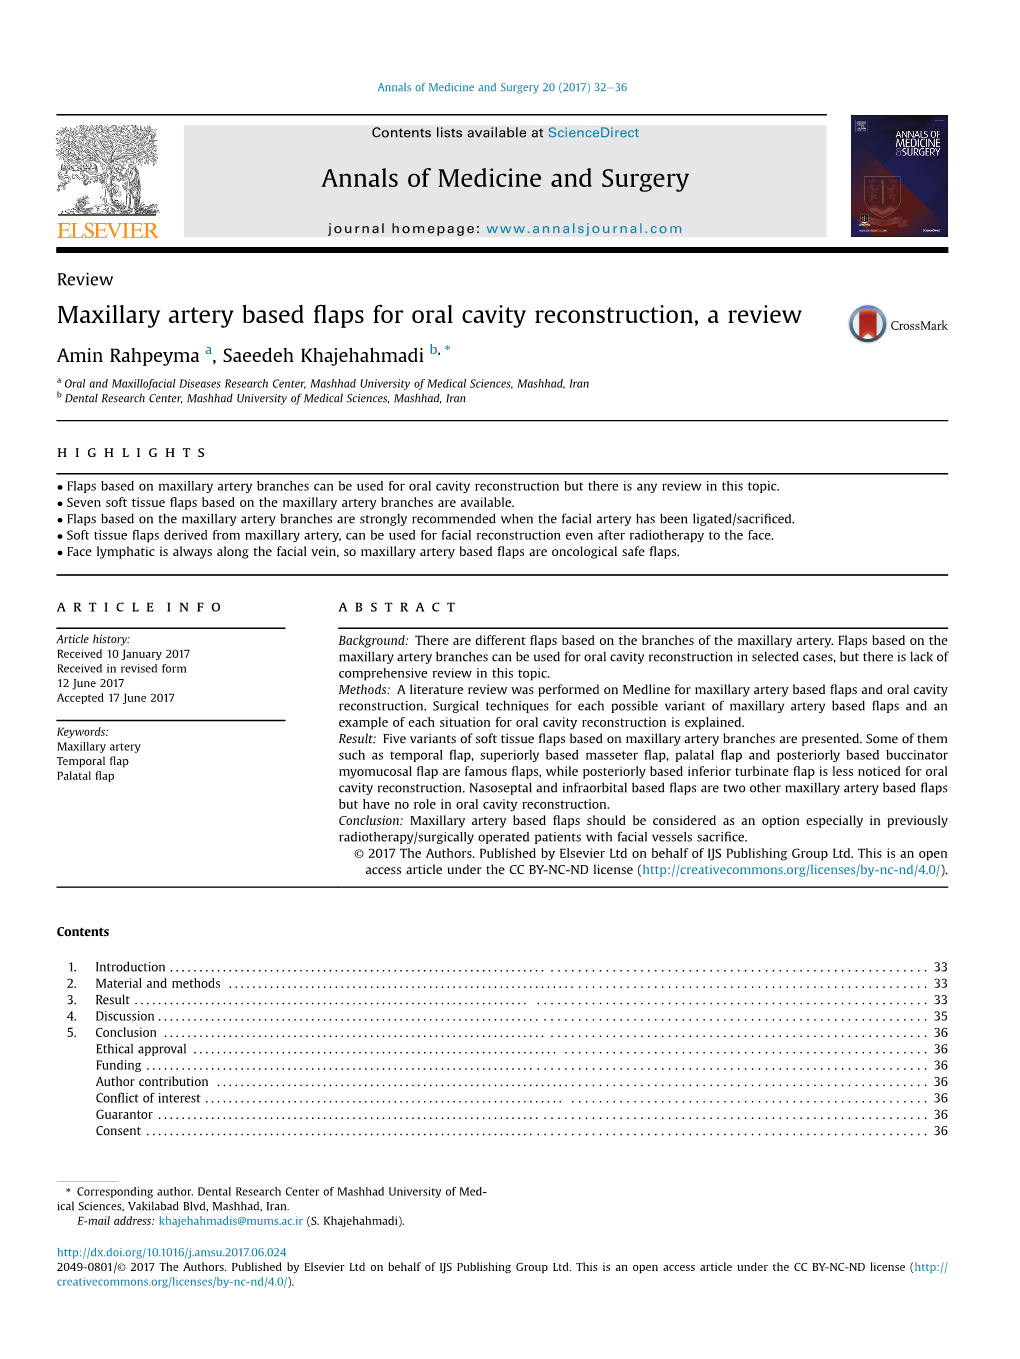 Maxillary Artery Based Flaps for Oral Cavity Reconstruction, a Review